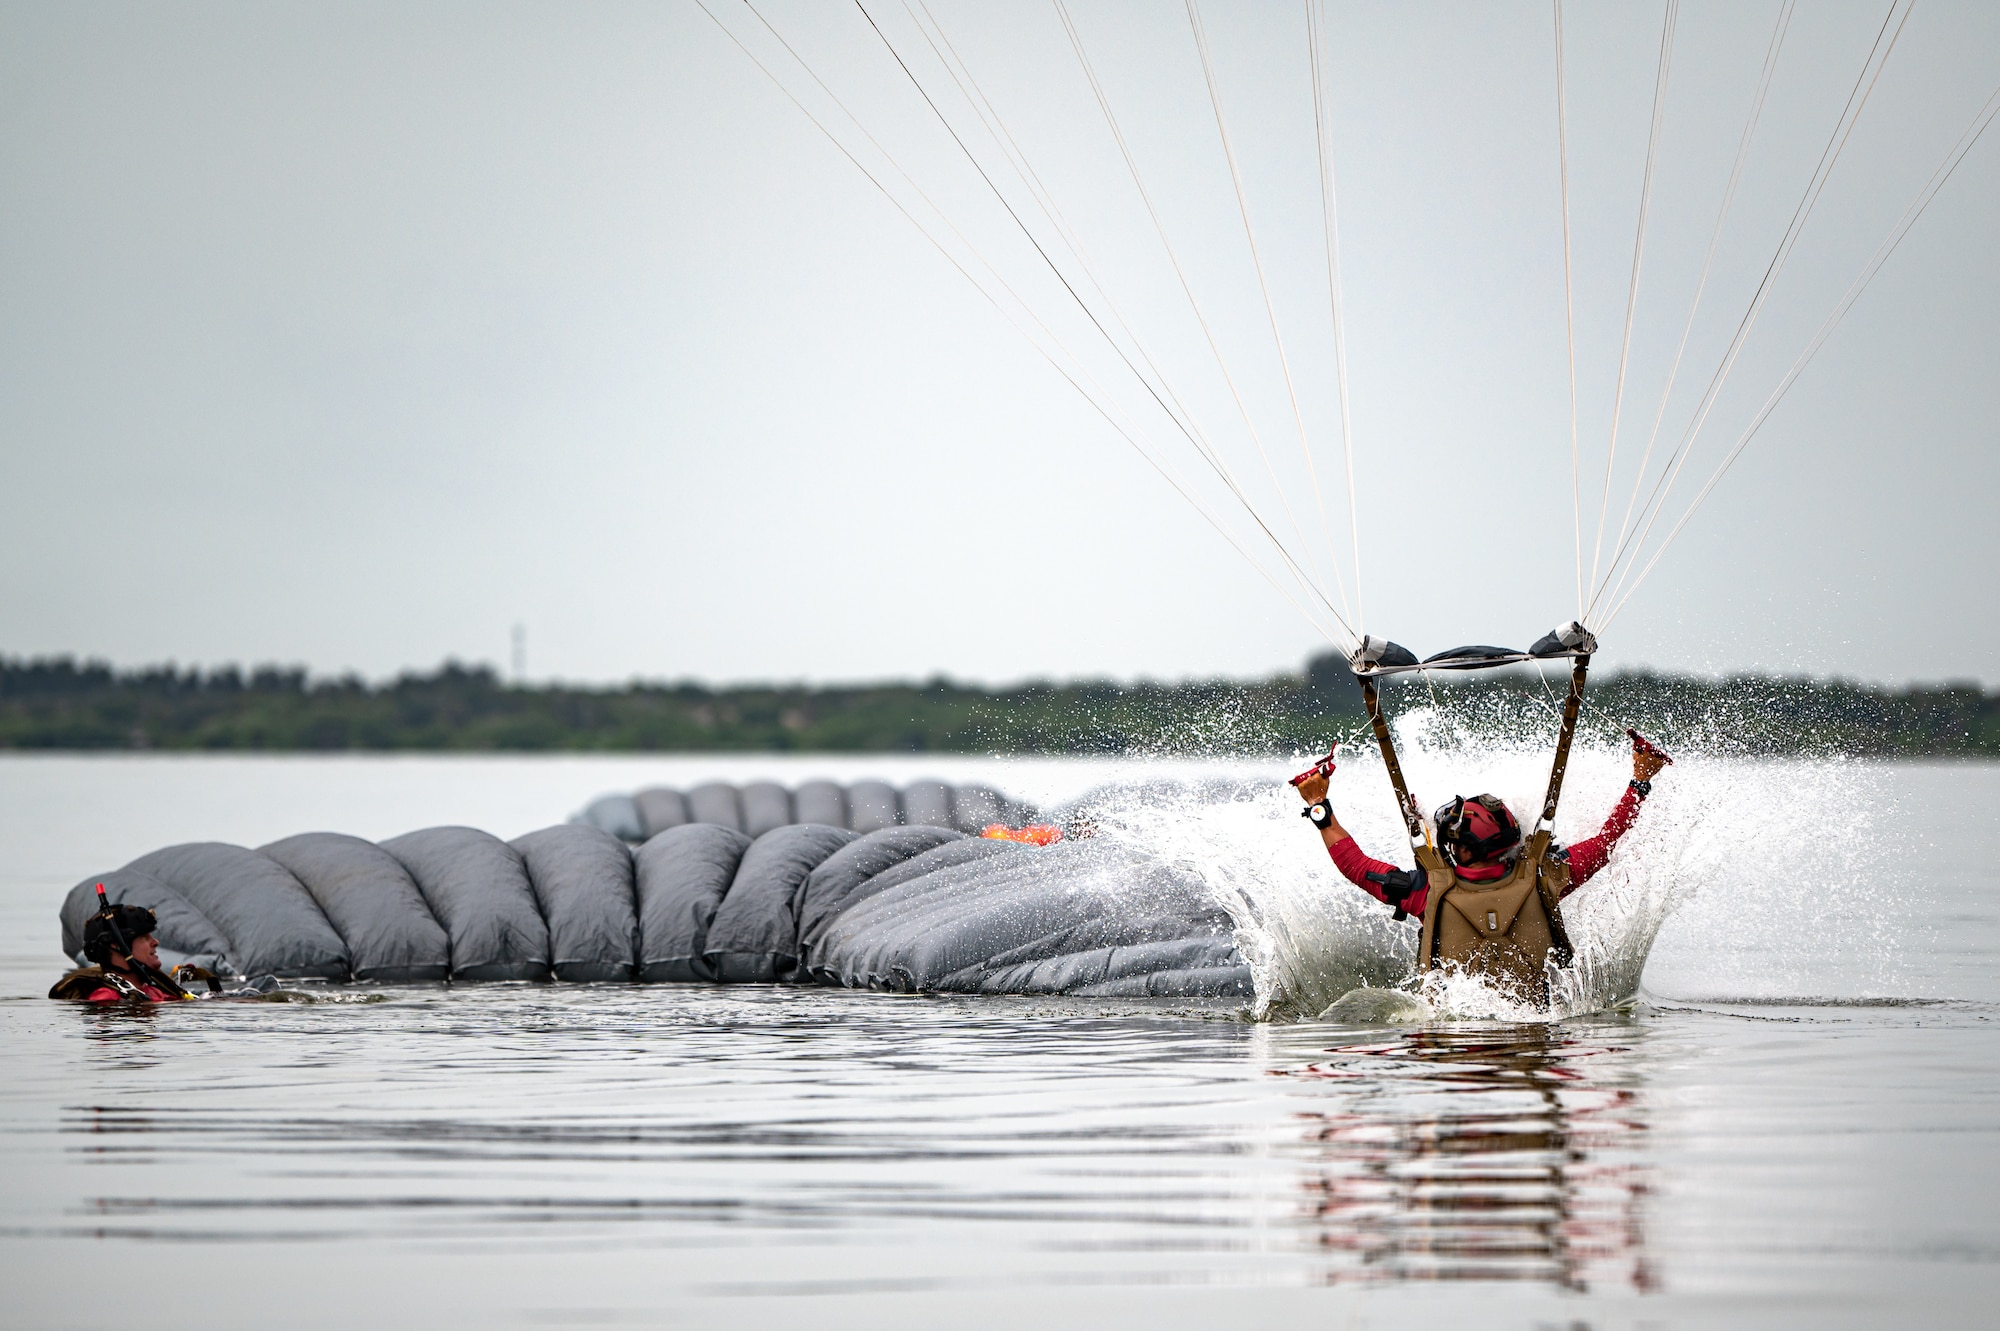 Photo of Airman landing in the water with a parachute